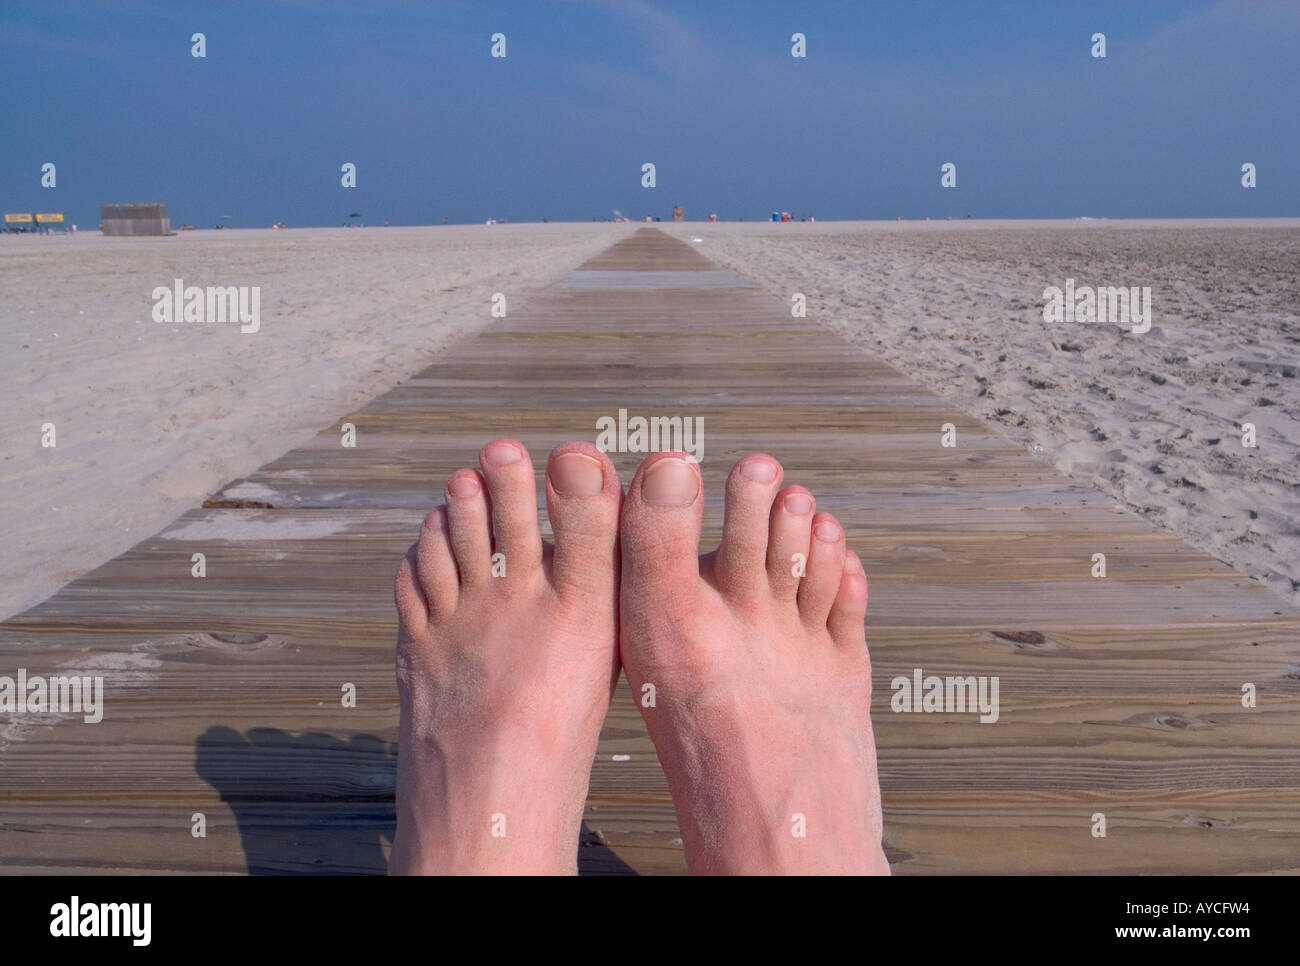 Feet in foreground on a boardwalk summer concepts male relaxing at beach Stock Photo